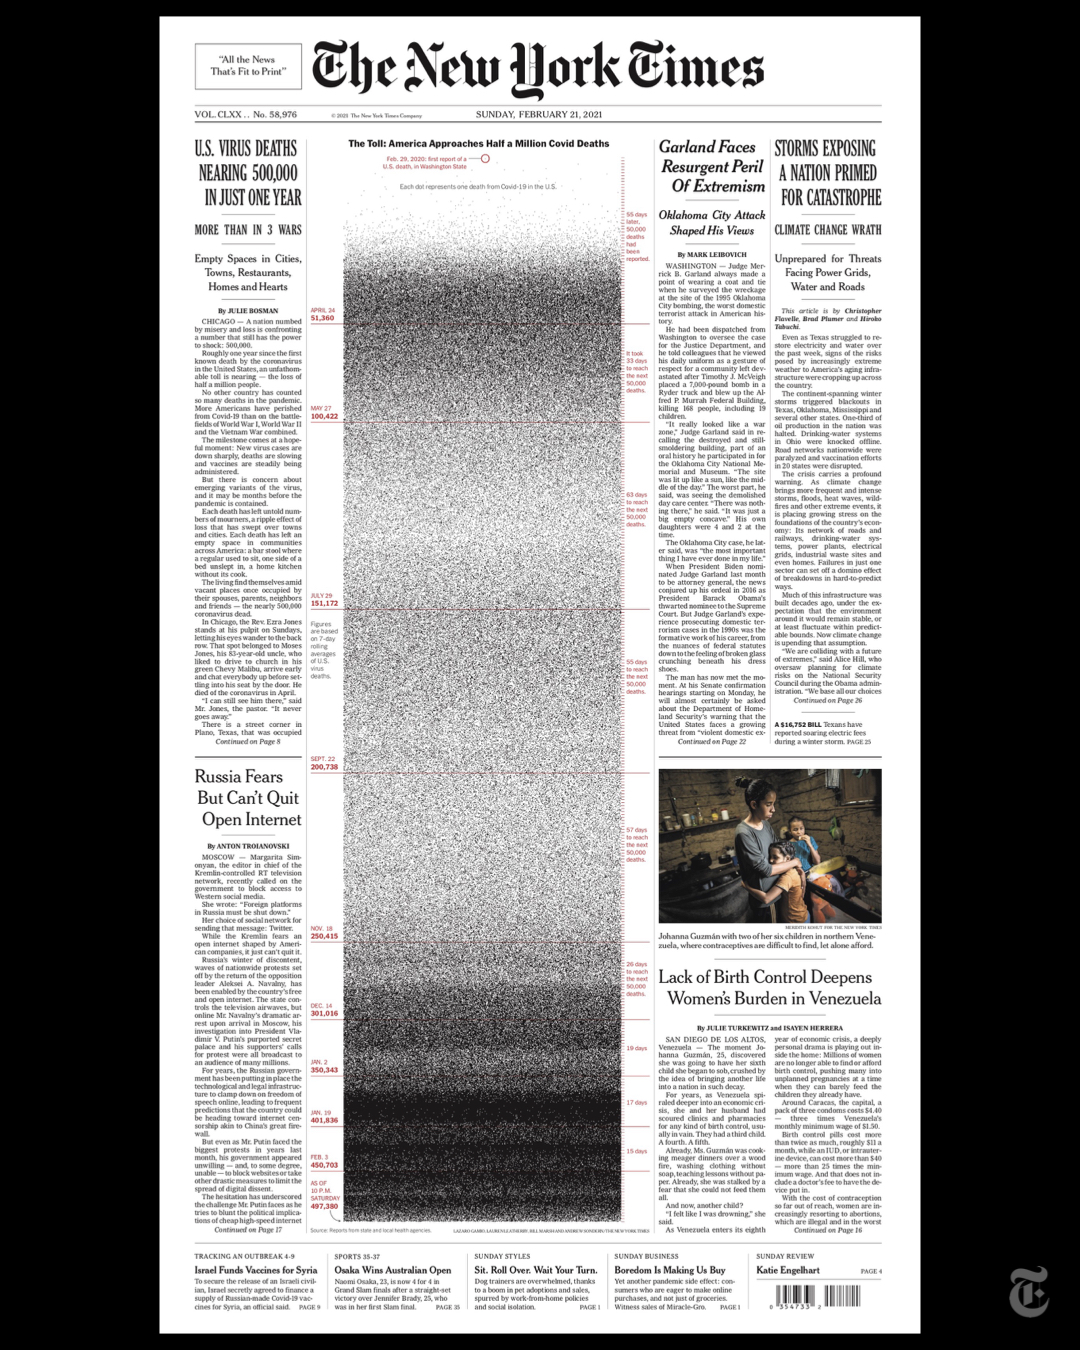 The New York Times On Twitter The Front Page Of The New York Times For Feb 21 2021 As The U S Nears 500 000 Dead From Covid 19 Each Dot Represents A Life Lost